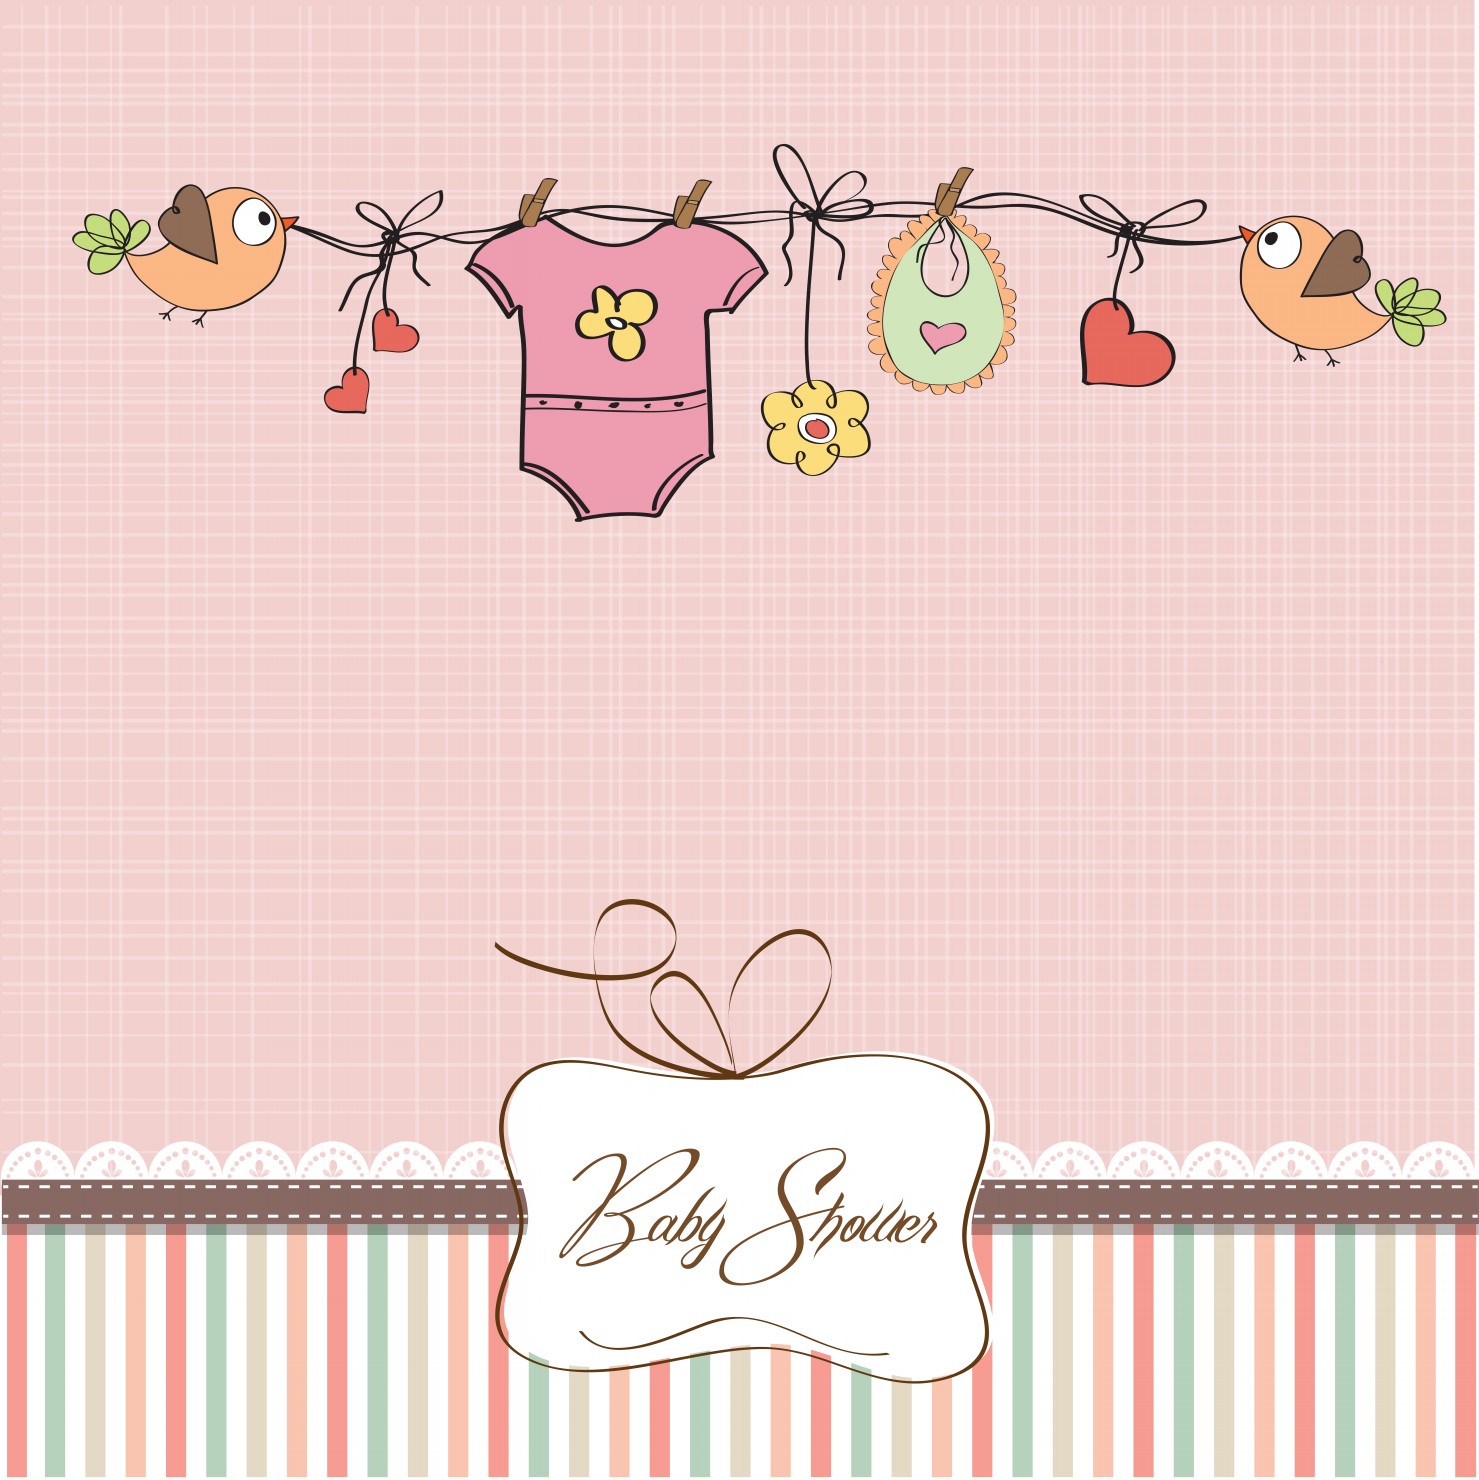 Baby Shower Cards Free 18 Printable Baby Shower Invites For Any Baby Shower Invitation To Be